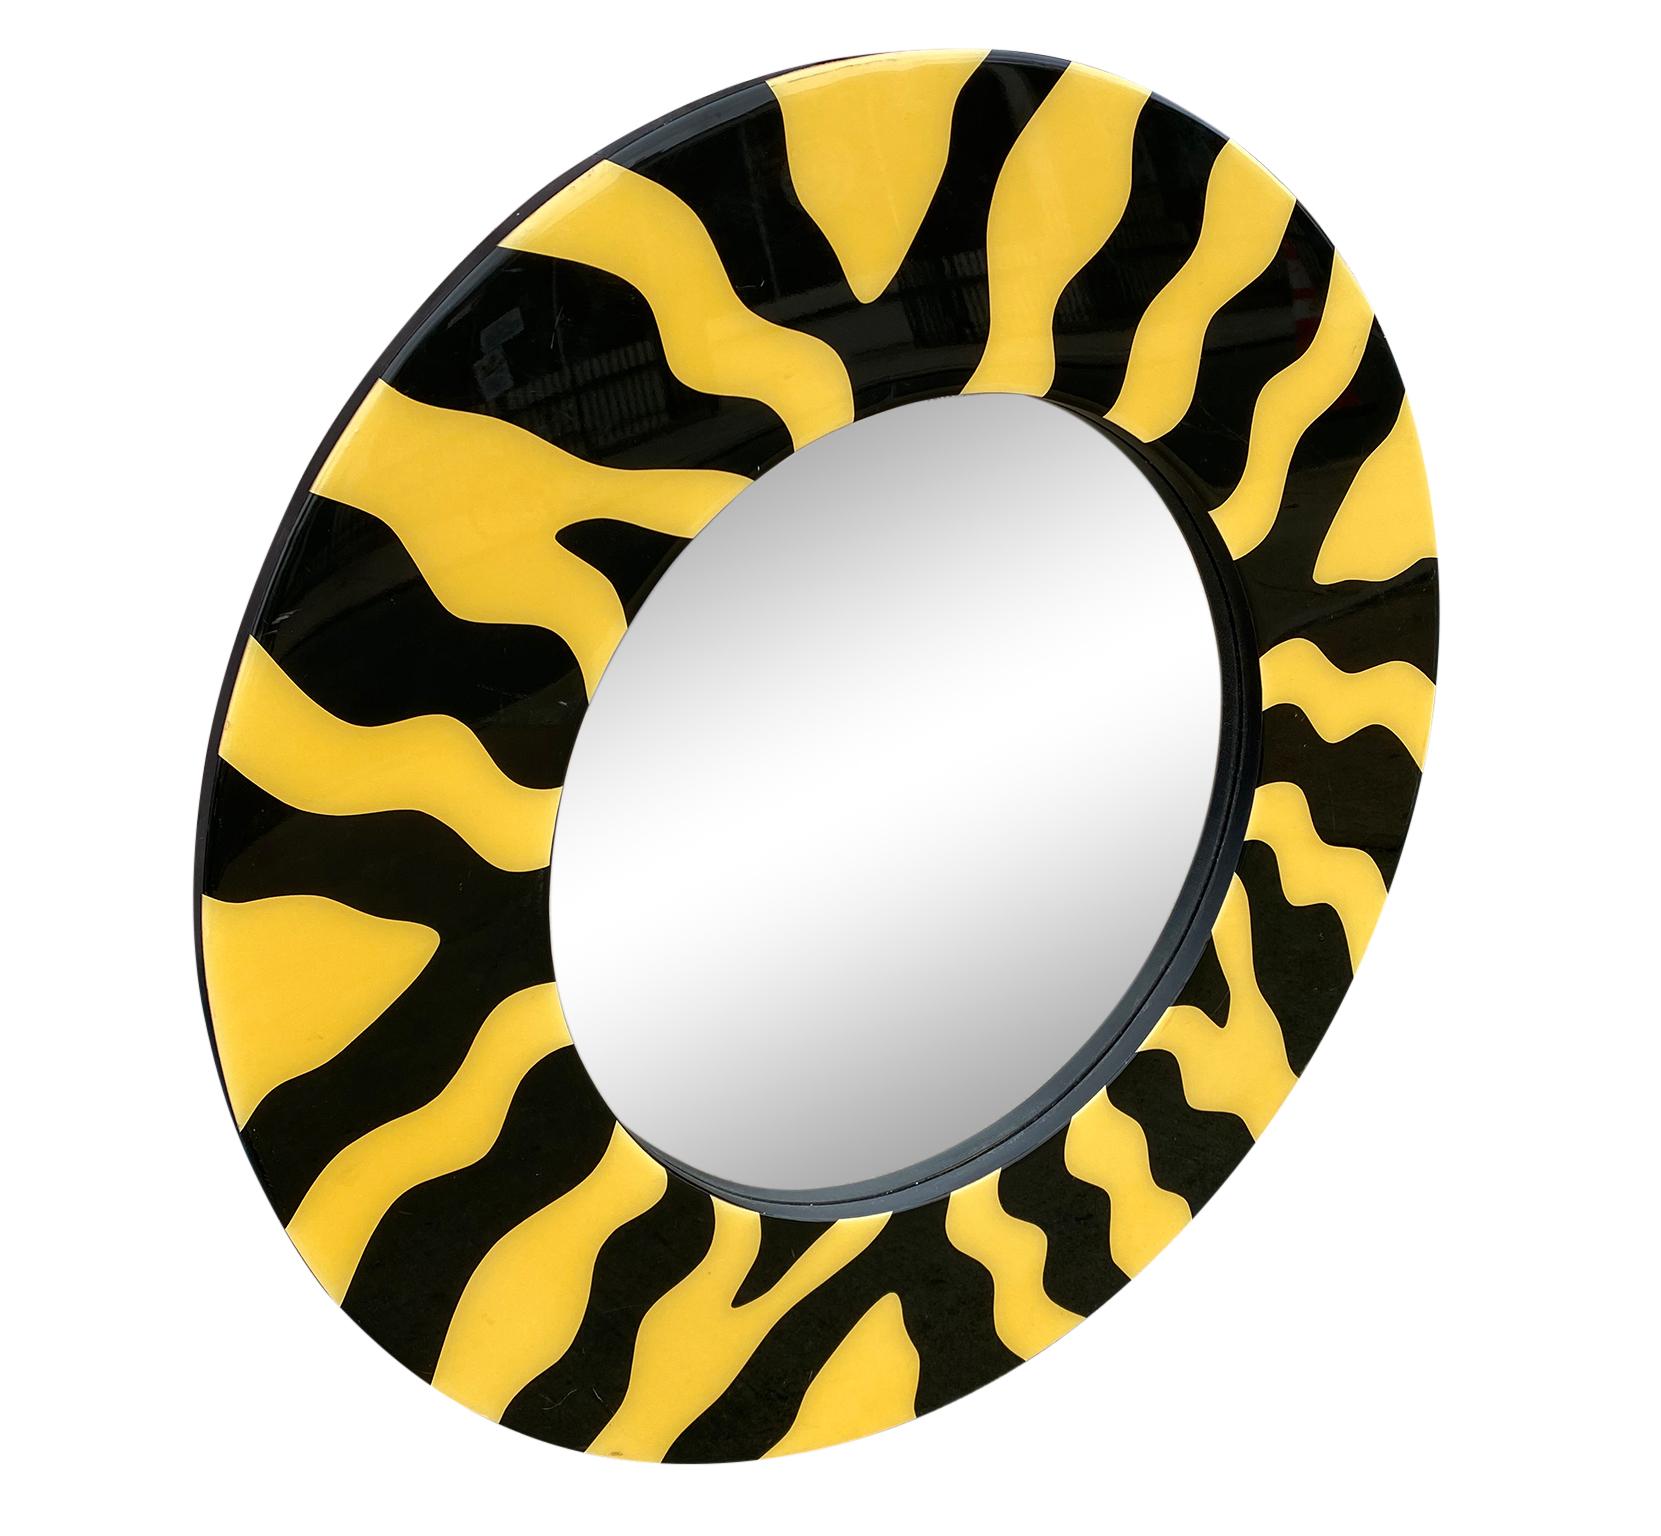 Mid-Century Modern mod Pop Art wild tiger strip wall round mirror style of Memphis Milano / Ettore Sottsass.
Yellow and black.

Made for wall mounting with wire on back.

Measures: 36